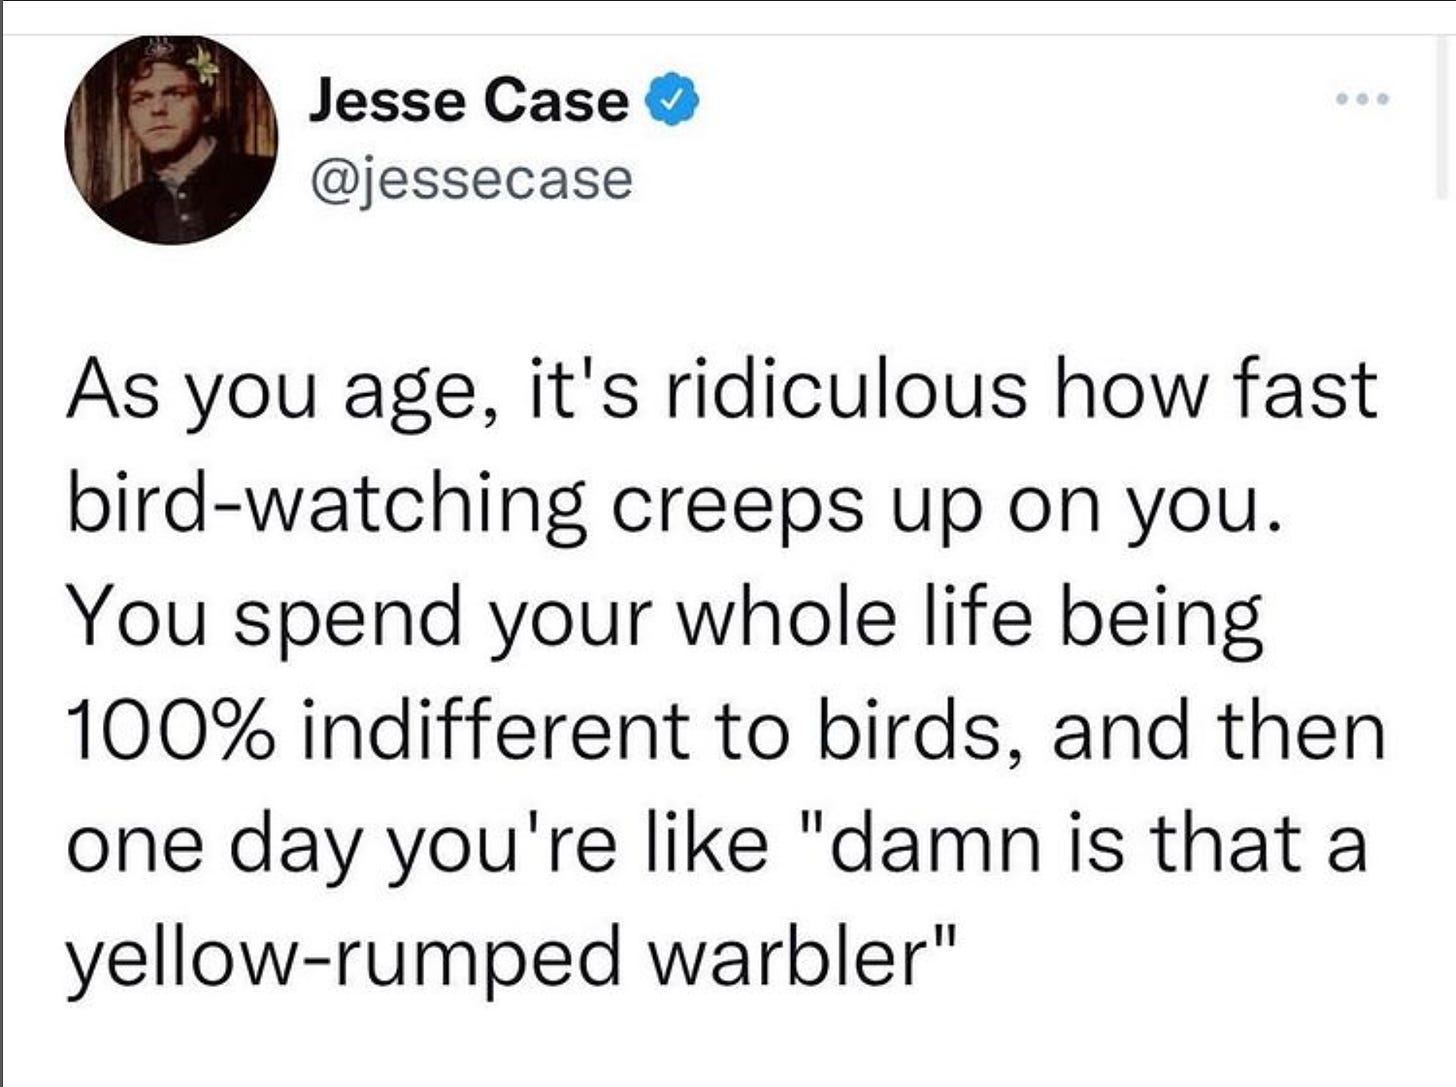 a tweet from @jessecase which reads "As you age, it's ridiculous how fast bird-watching creeps up on you. You spend your whole life being 100% indifferent to birds, and then one day you're like "damn is that a yellow-rumped warbler"